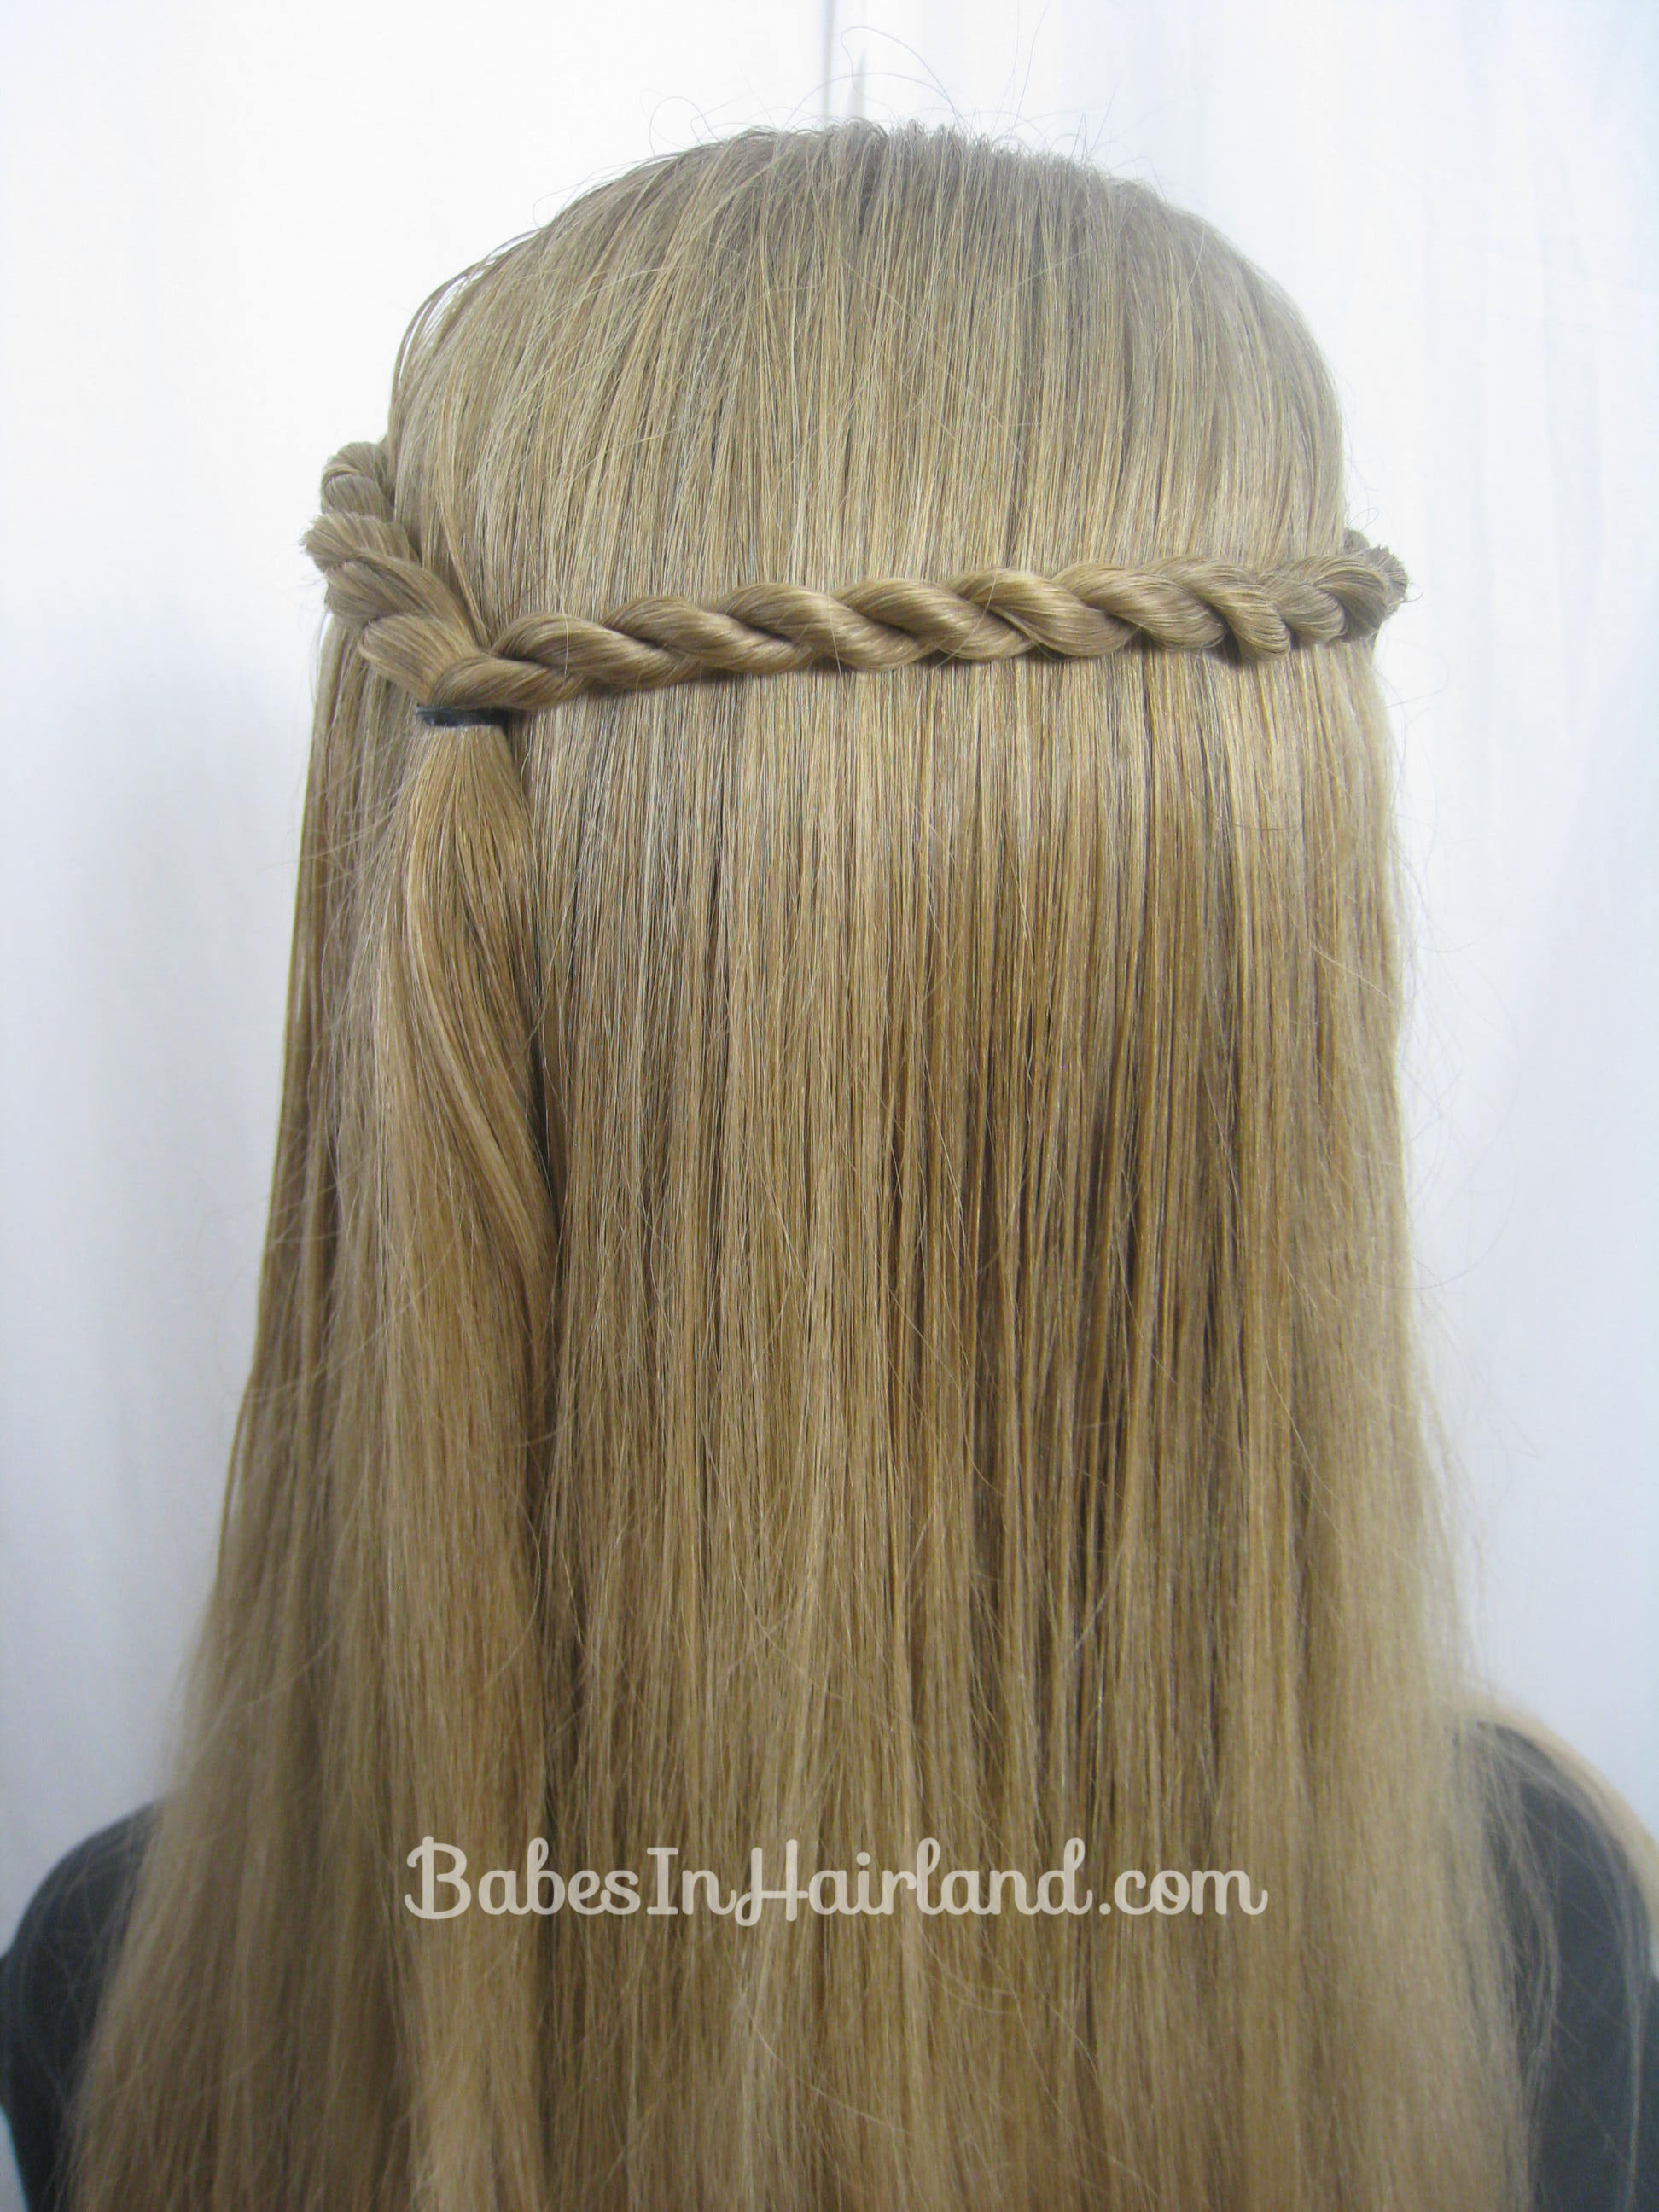 Rope Braid Hairstyle - Babes In Hairland